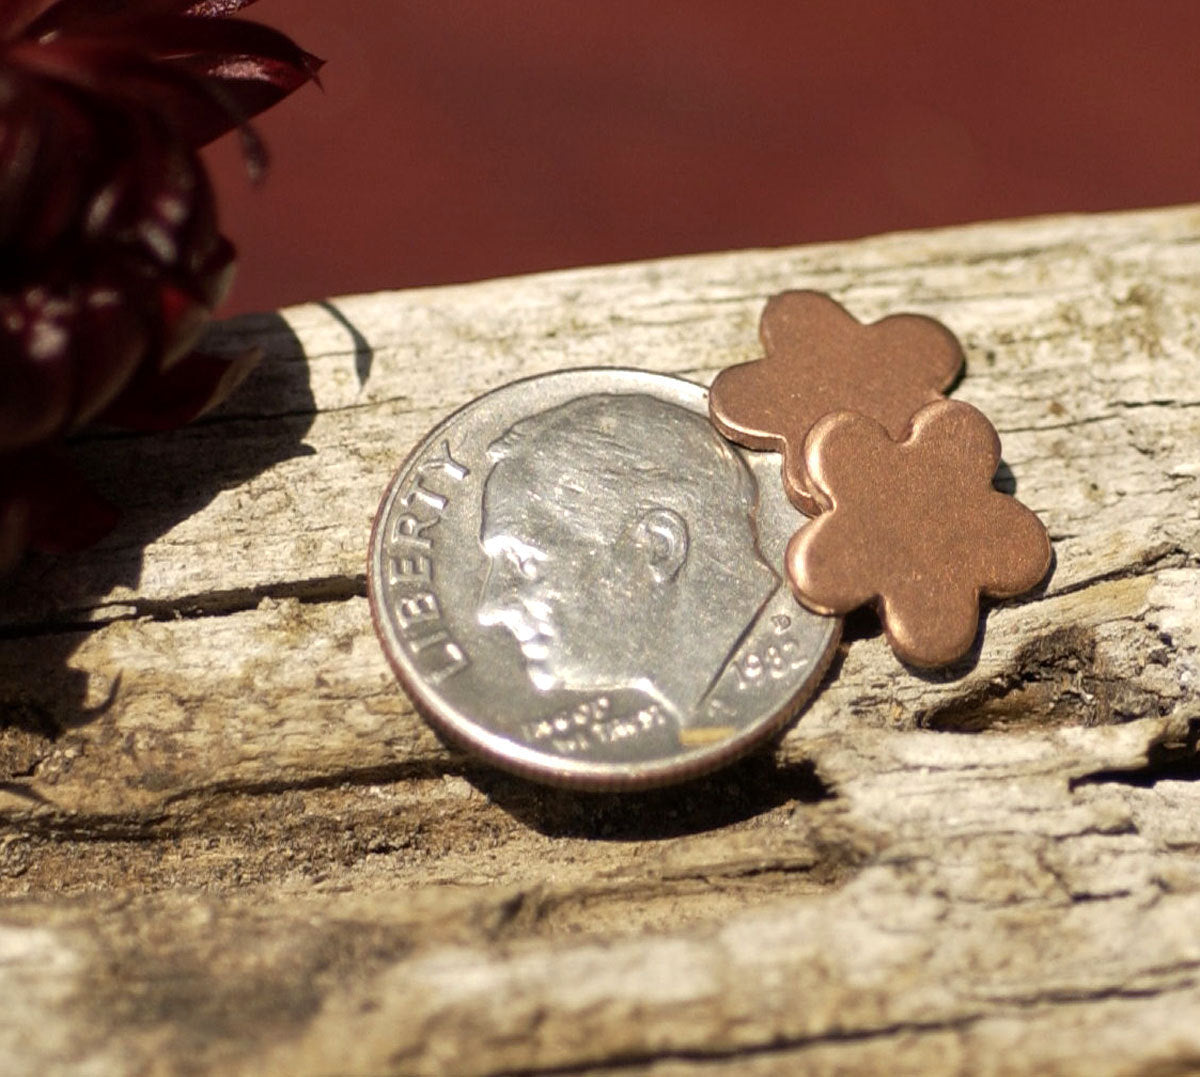 Tiny flower shapes for soldering mini 5 Petal flowers 9mm copper, brass, bronze, or nickel silver